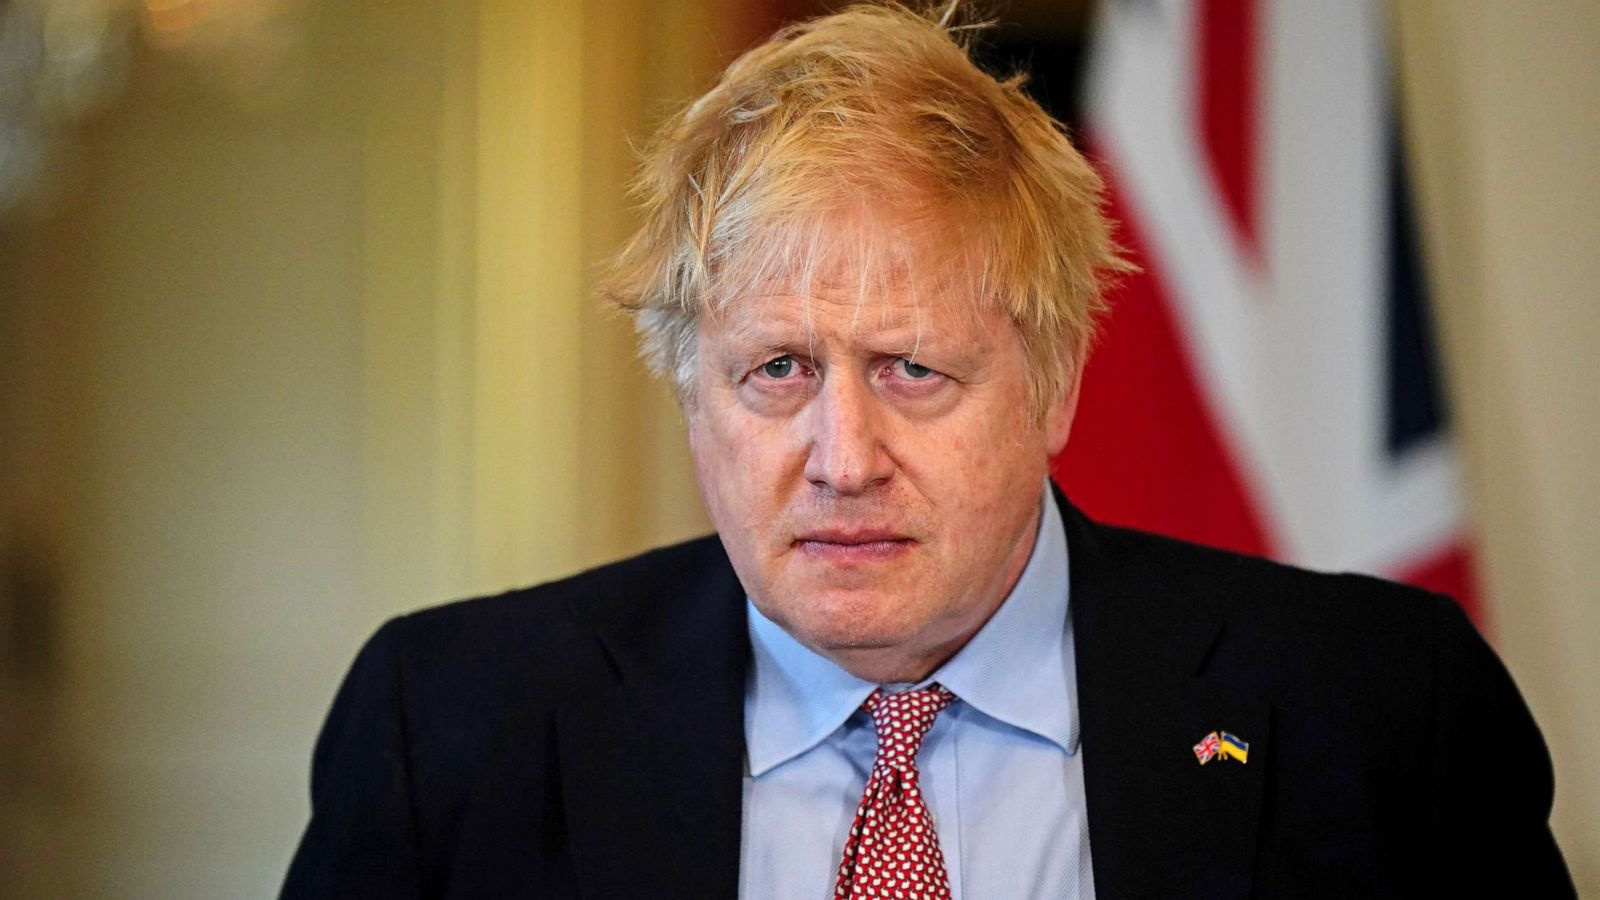 Boris Johnson is the first president to be fined for violating his own laws